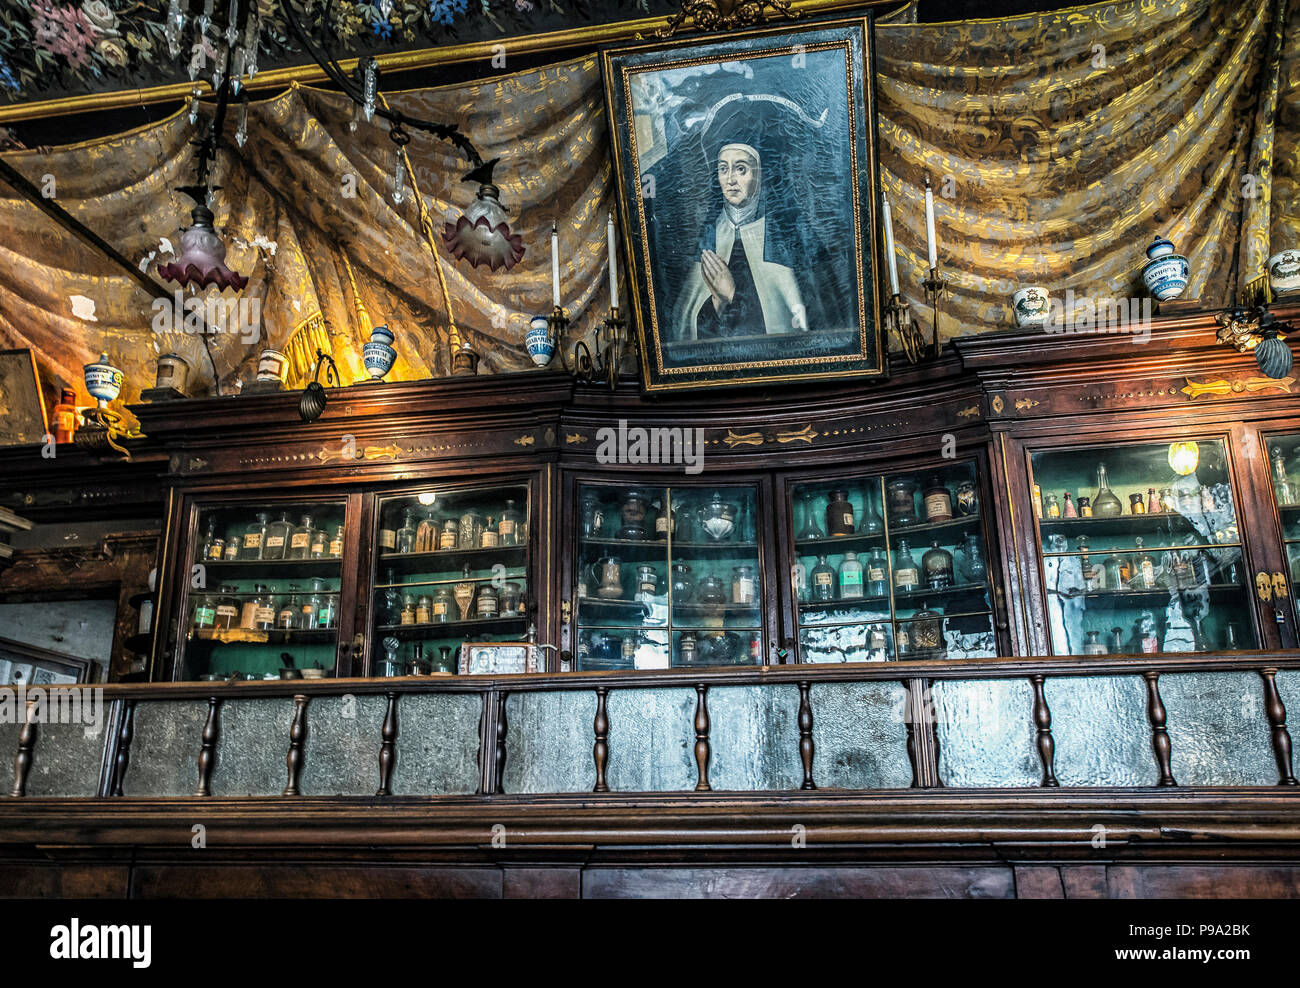 Cabinets and furnishings behind the desk of the pharmacist of the old Pharmacy and Apothecary 'Farmacia di S. Maria della Scala' in Piazza della Scala in Trastevere quarter, Rome, Italy Stock Photo